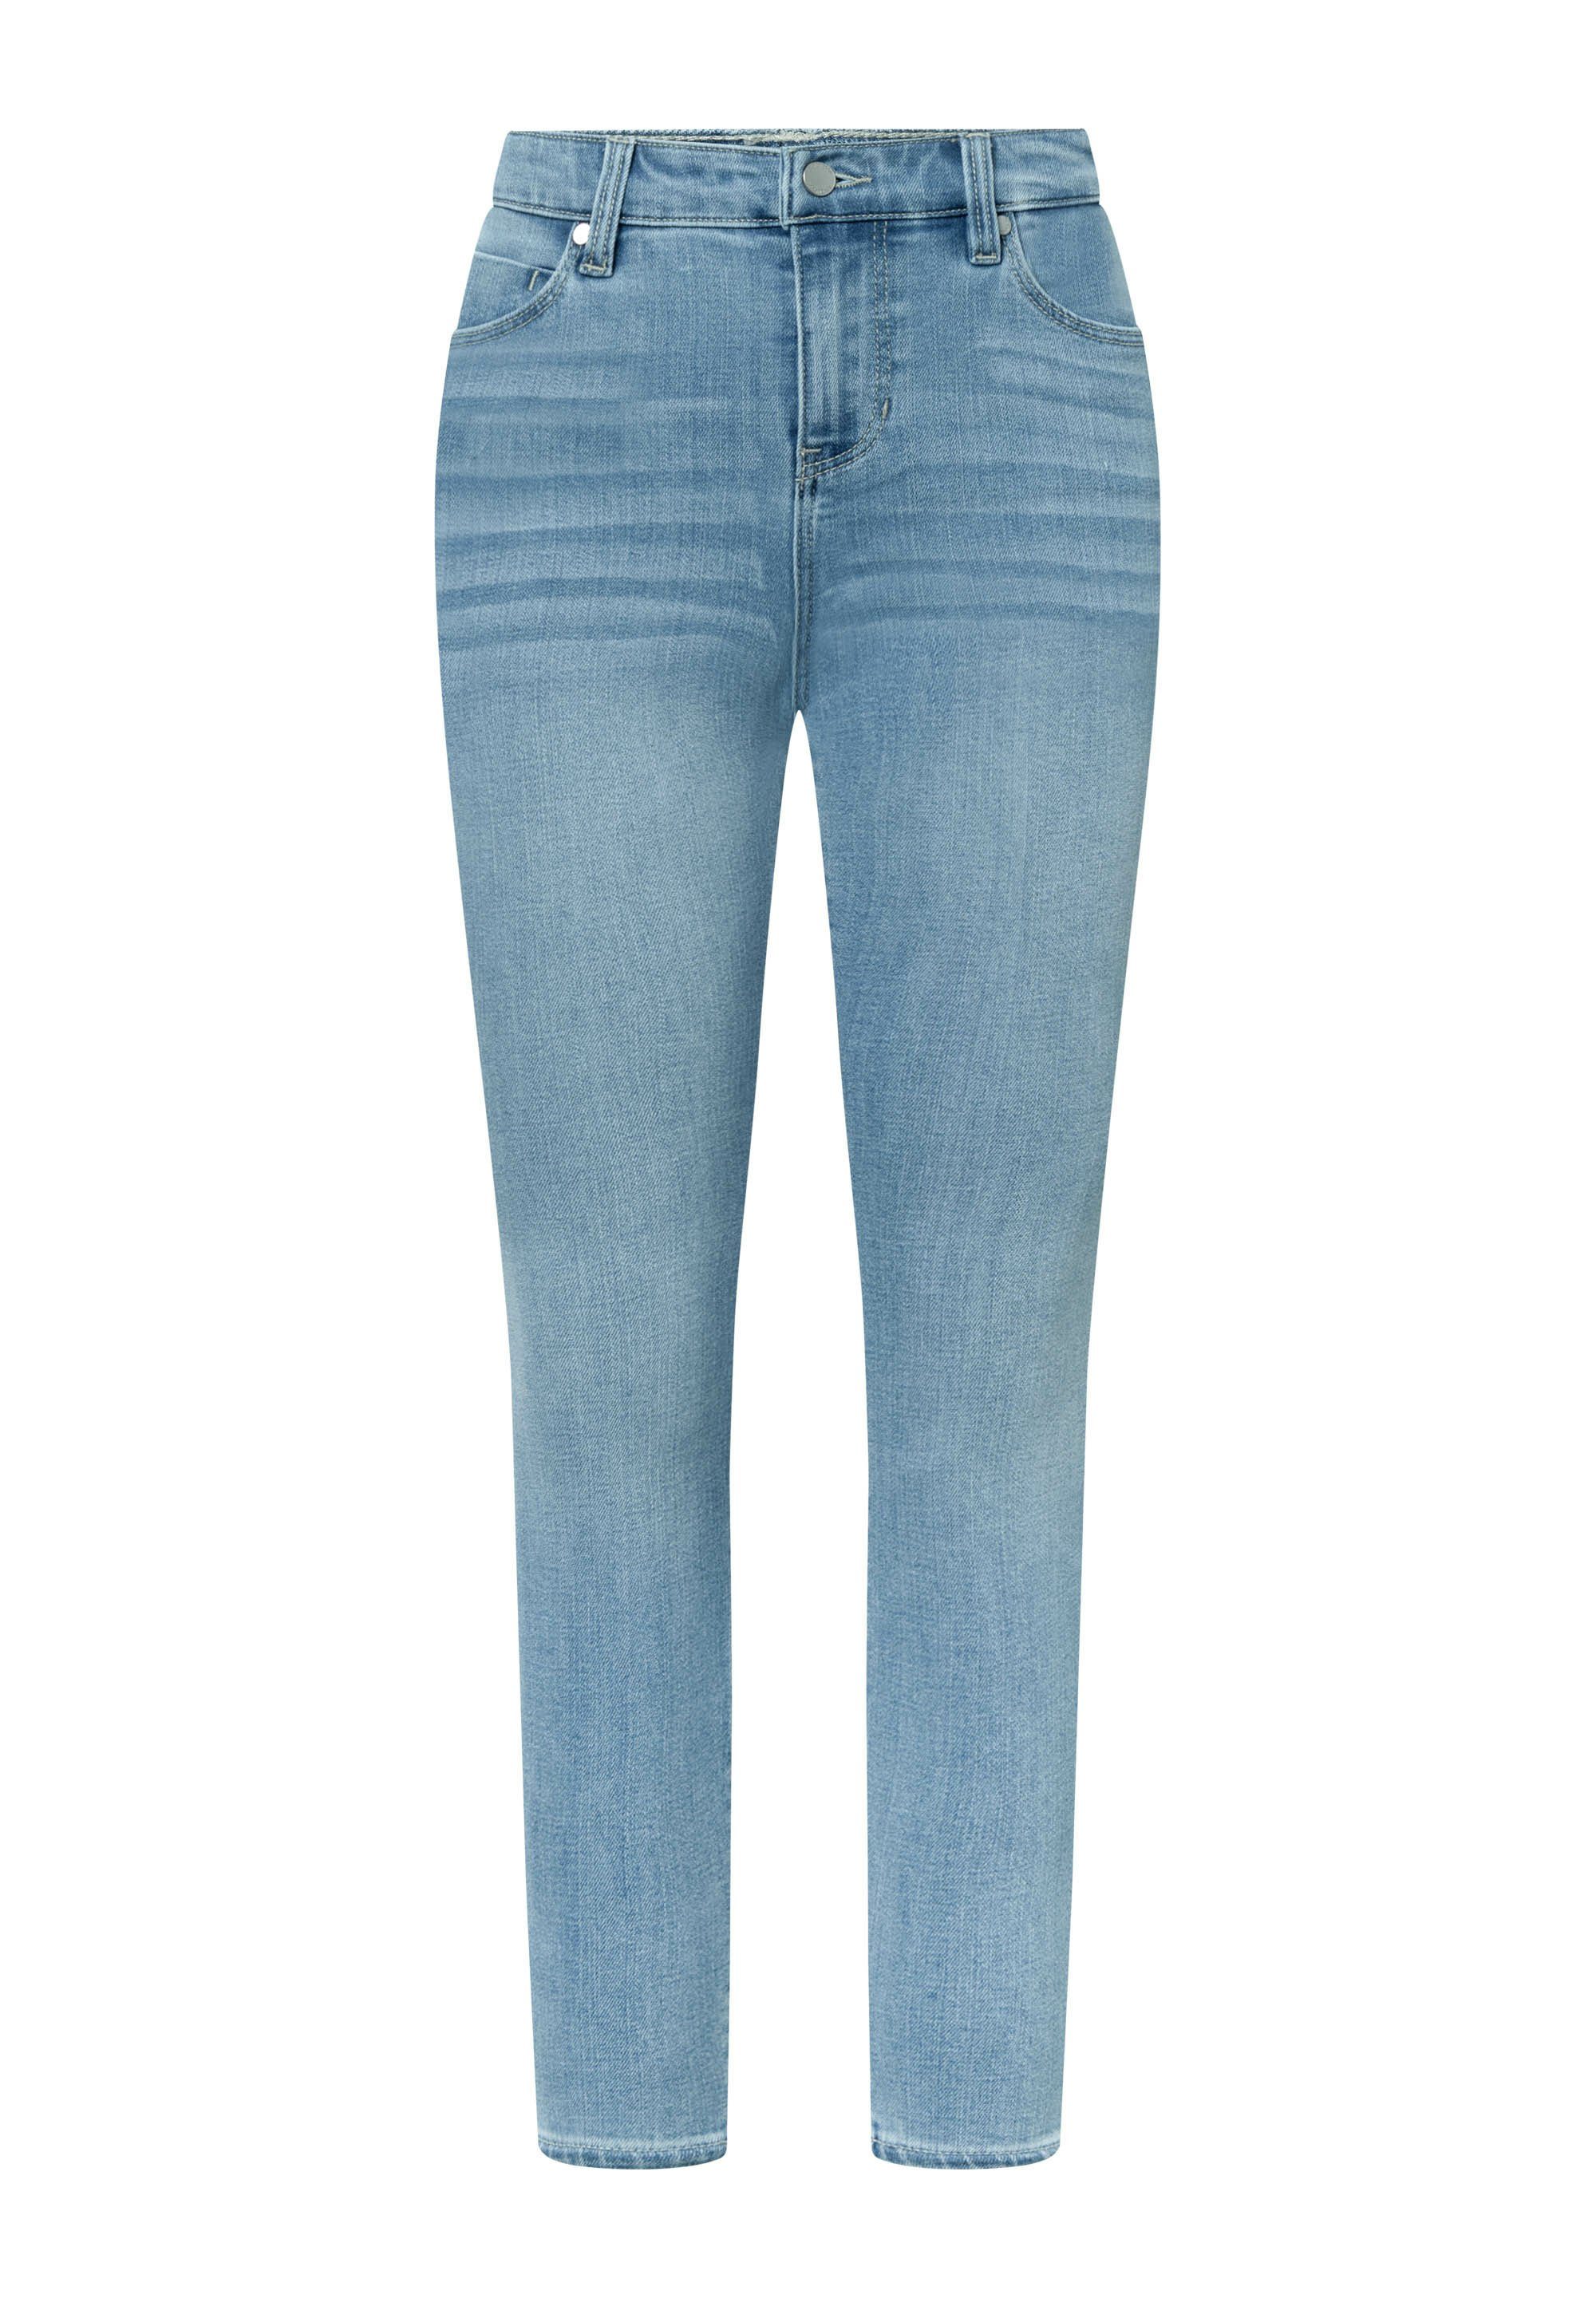 Ankle-Jeans komfortabel Liverpool Ankle und Stretchy Abby Skinny